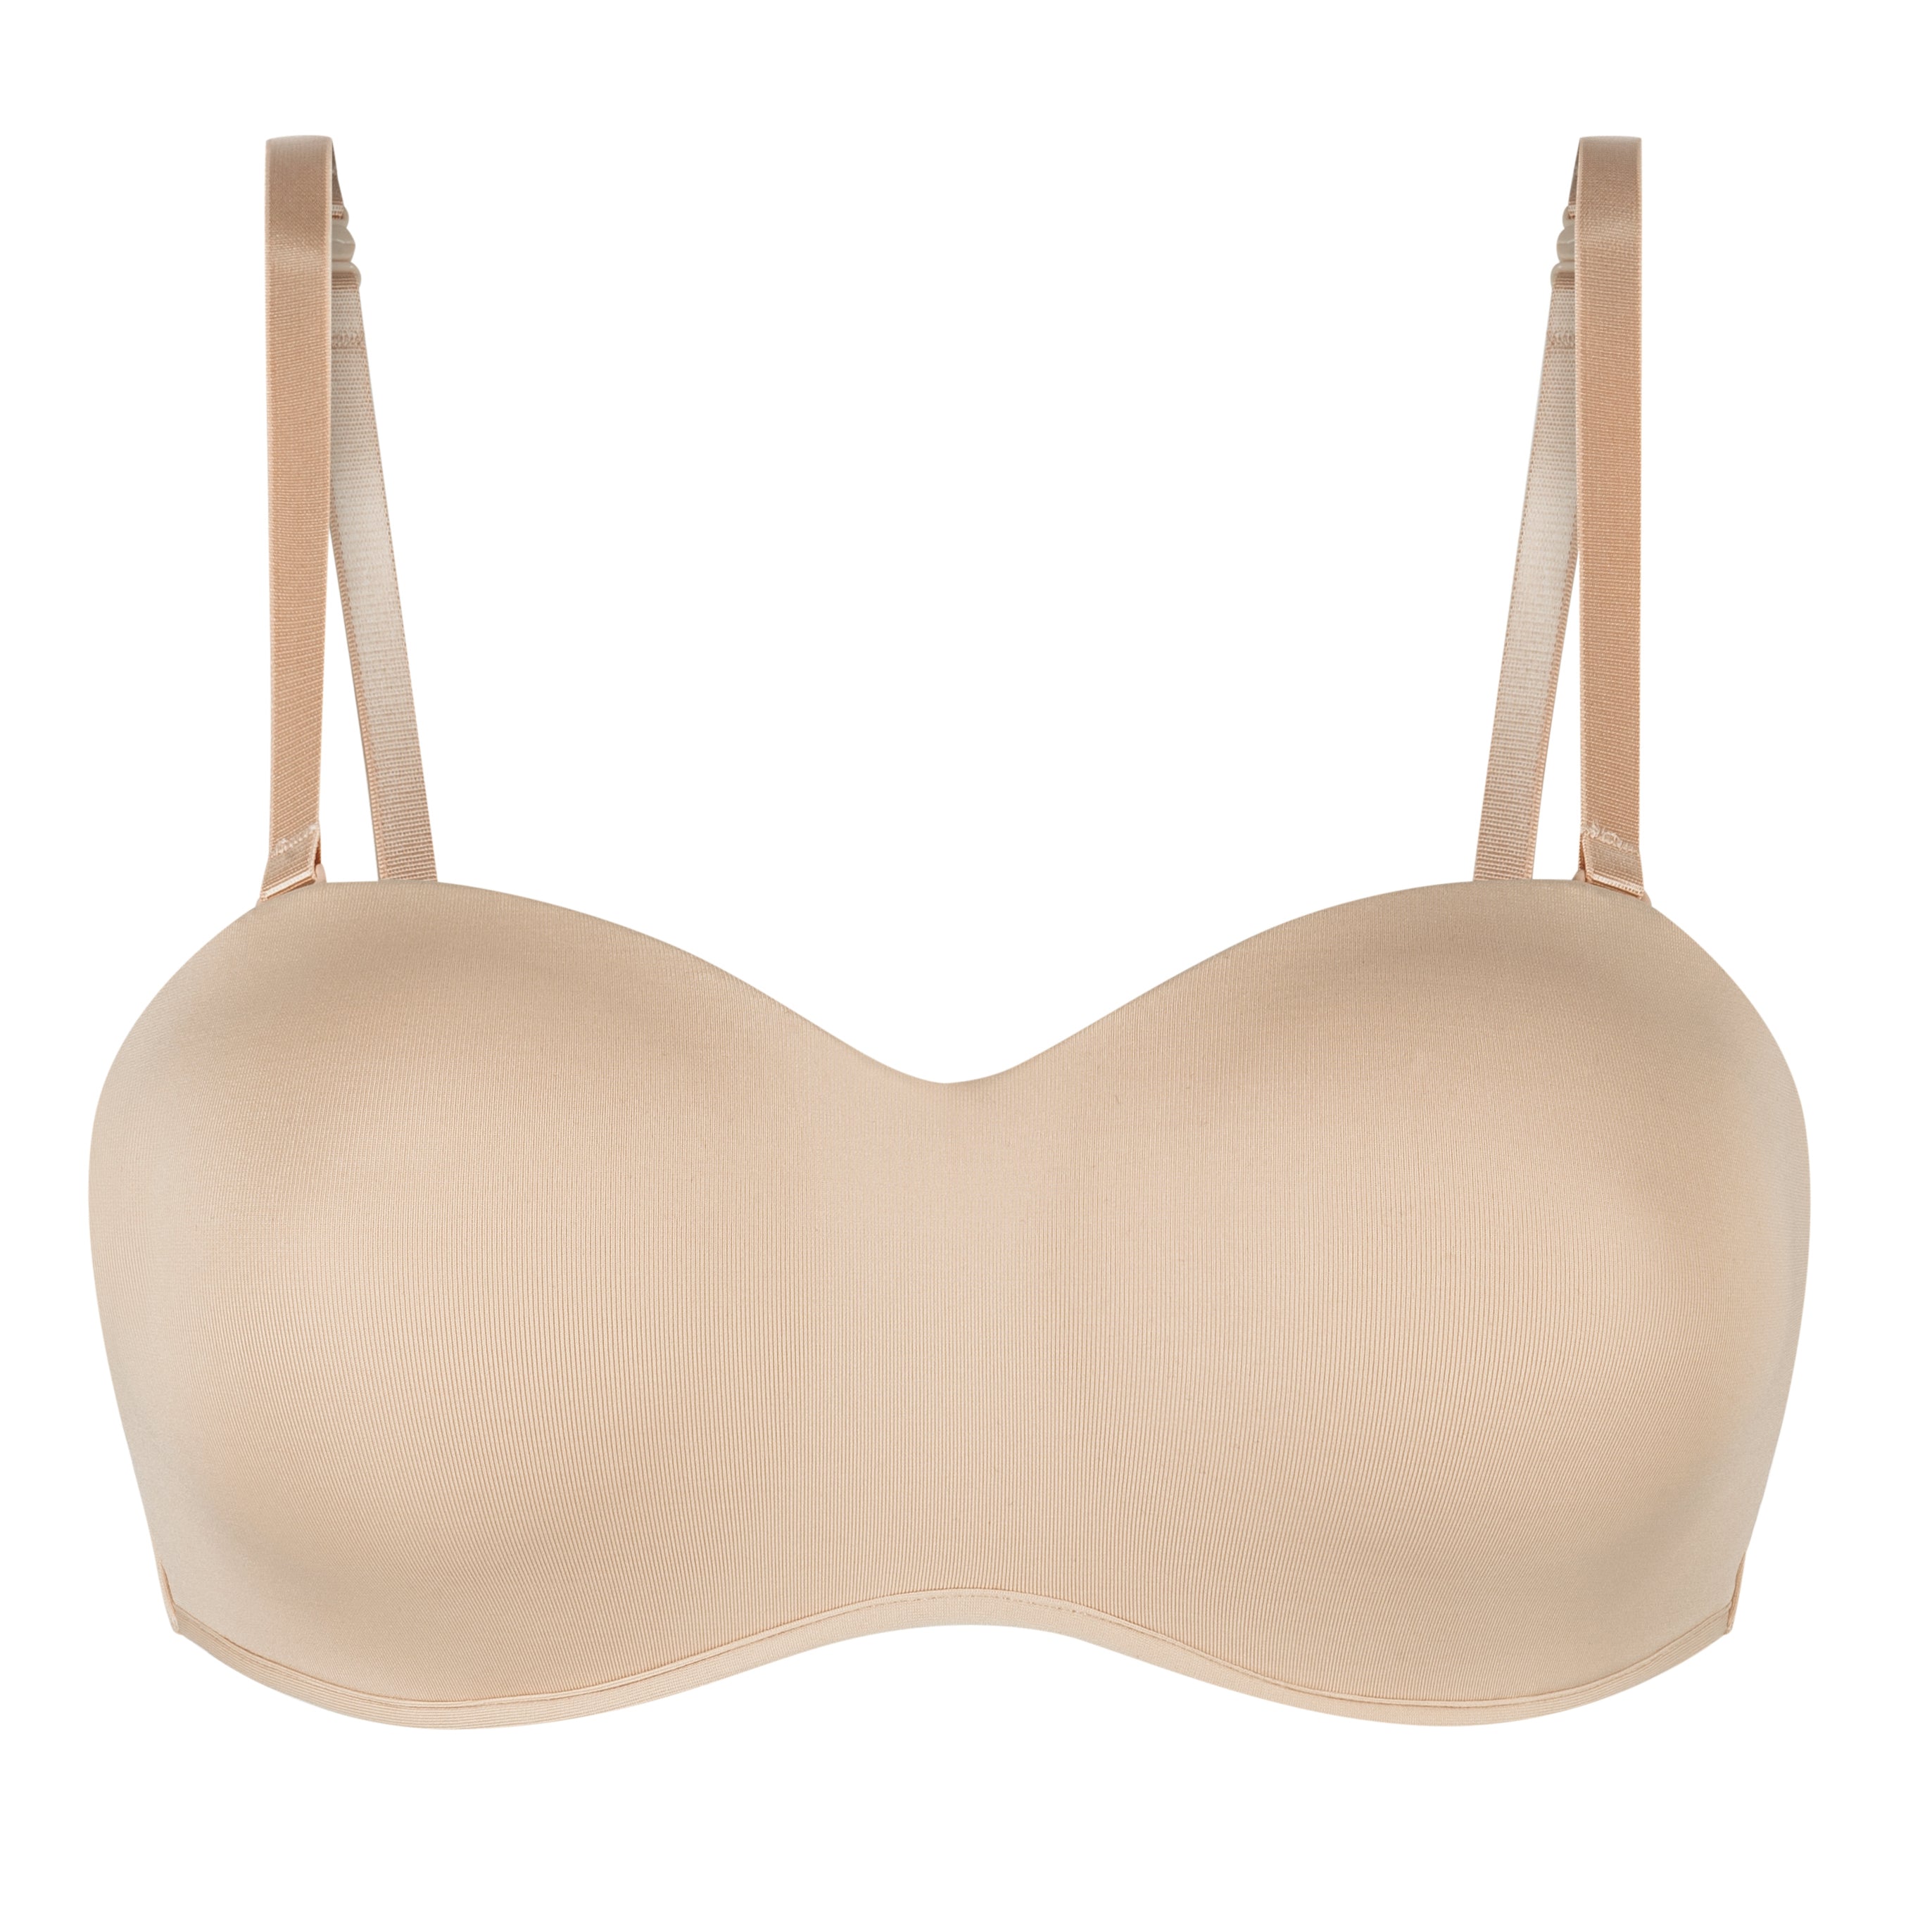 Barbara Strapless - Molded Cup Bra - Nude - Masectomy Bra by